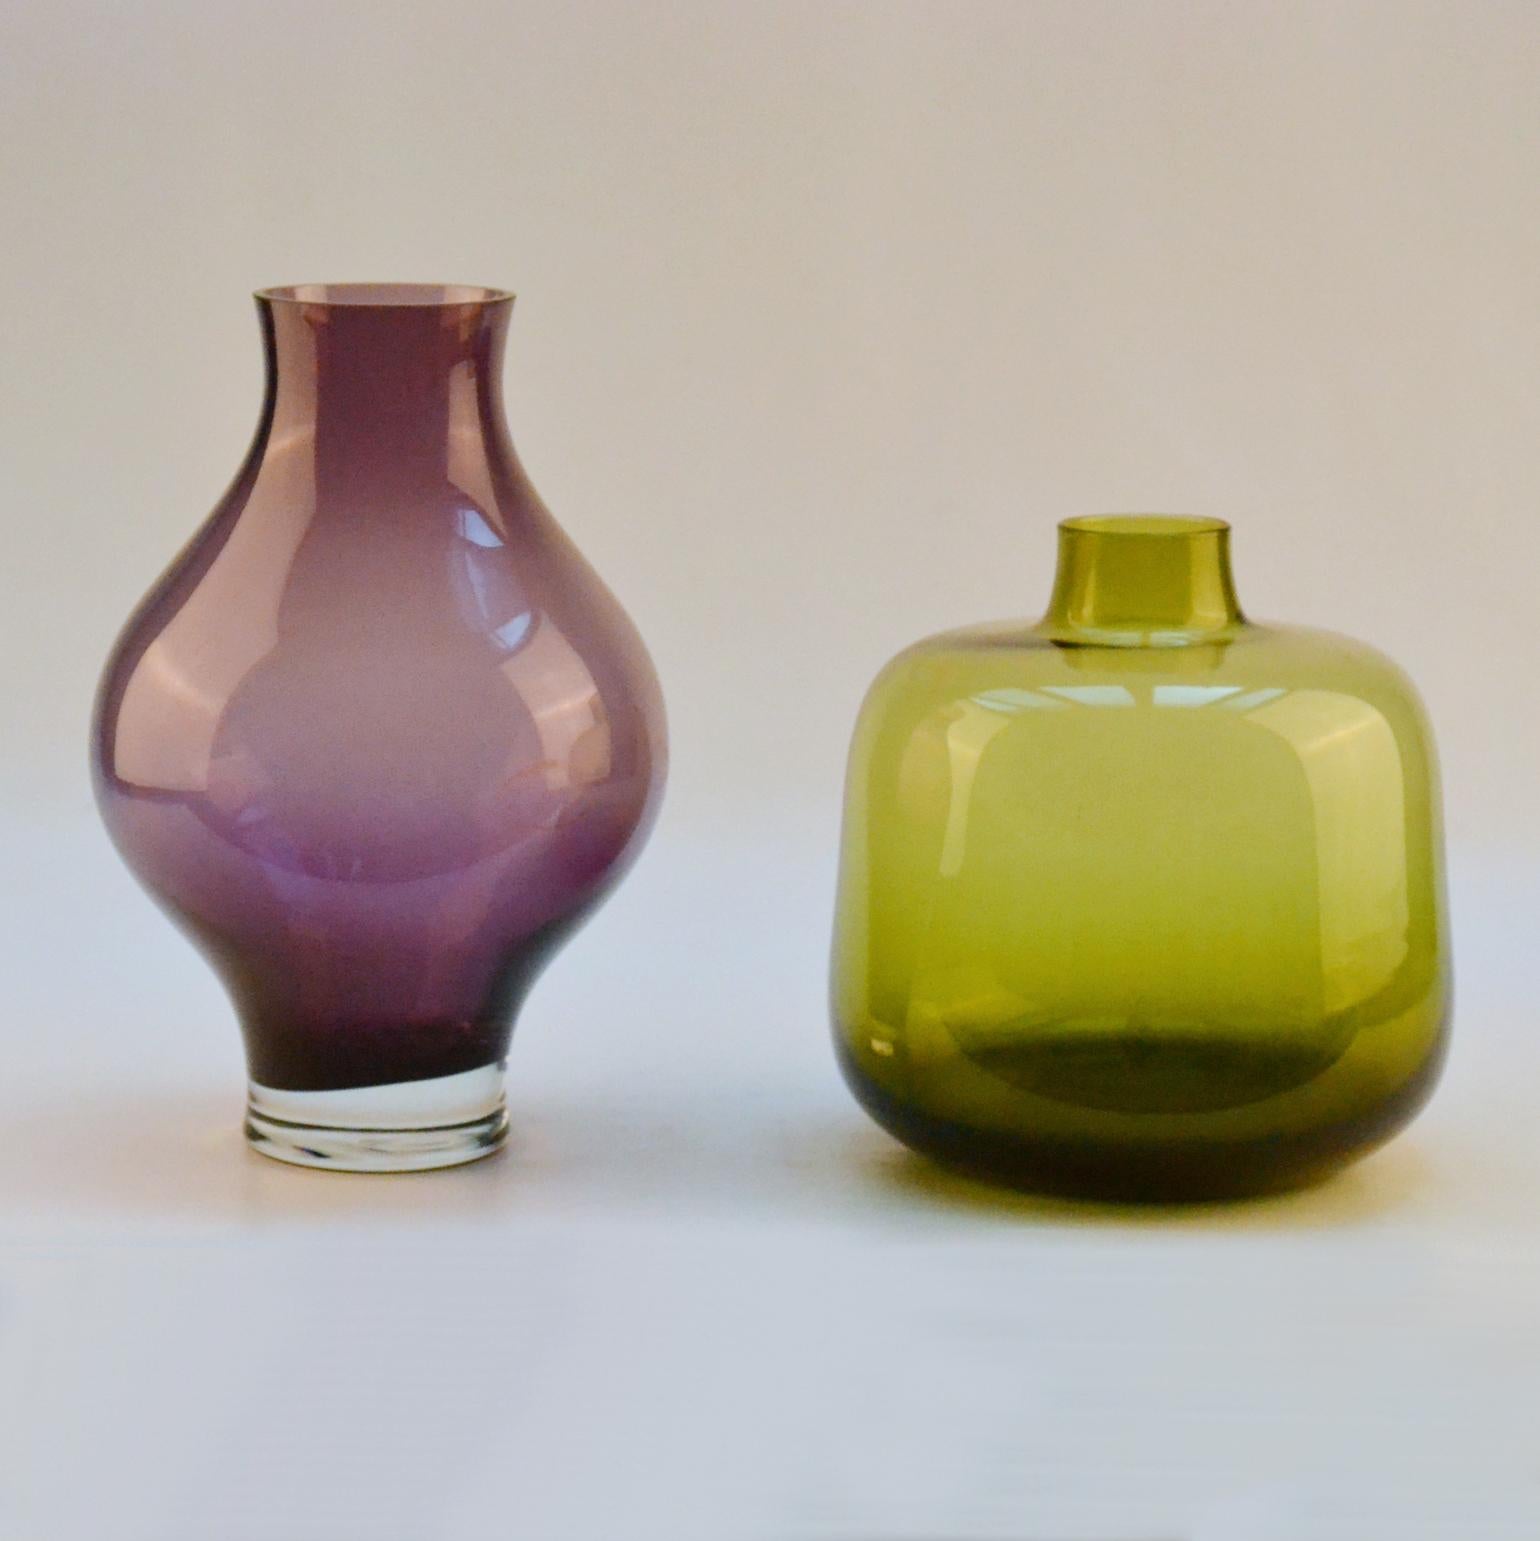 Set of two hand blown vases in olive green and purple attributed to Leerdam glass works, The Netherlands, 1960's. 
Glass maker Floris Meydam was chief designer at Leerdam Glass Factory, Holland, from 1949-1984. Leerdam created both table and